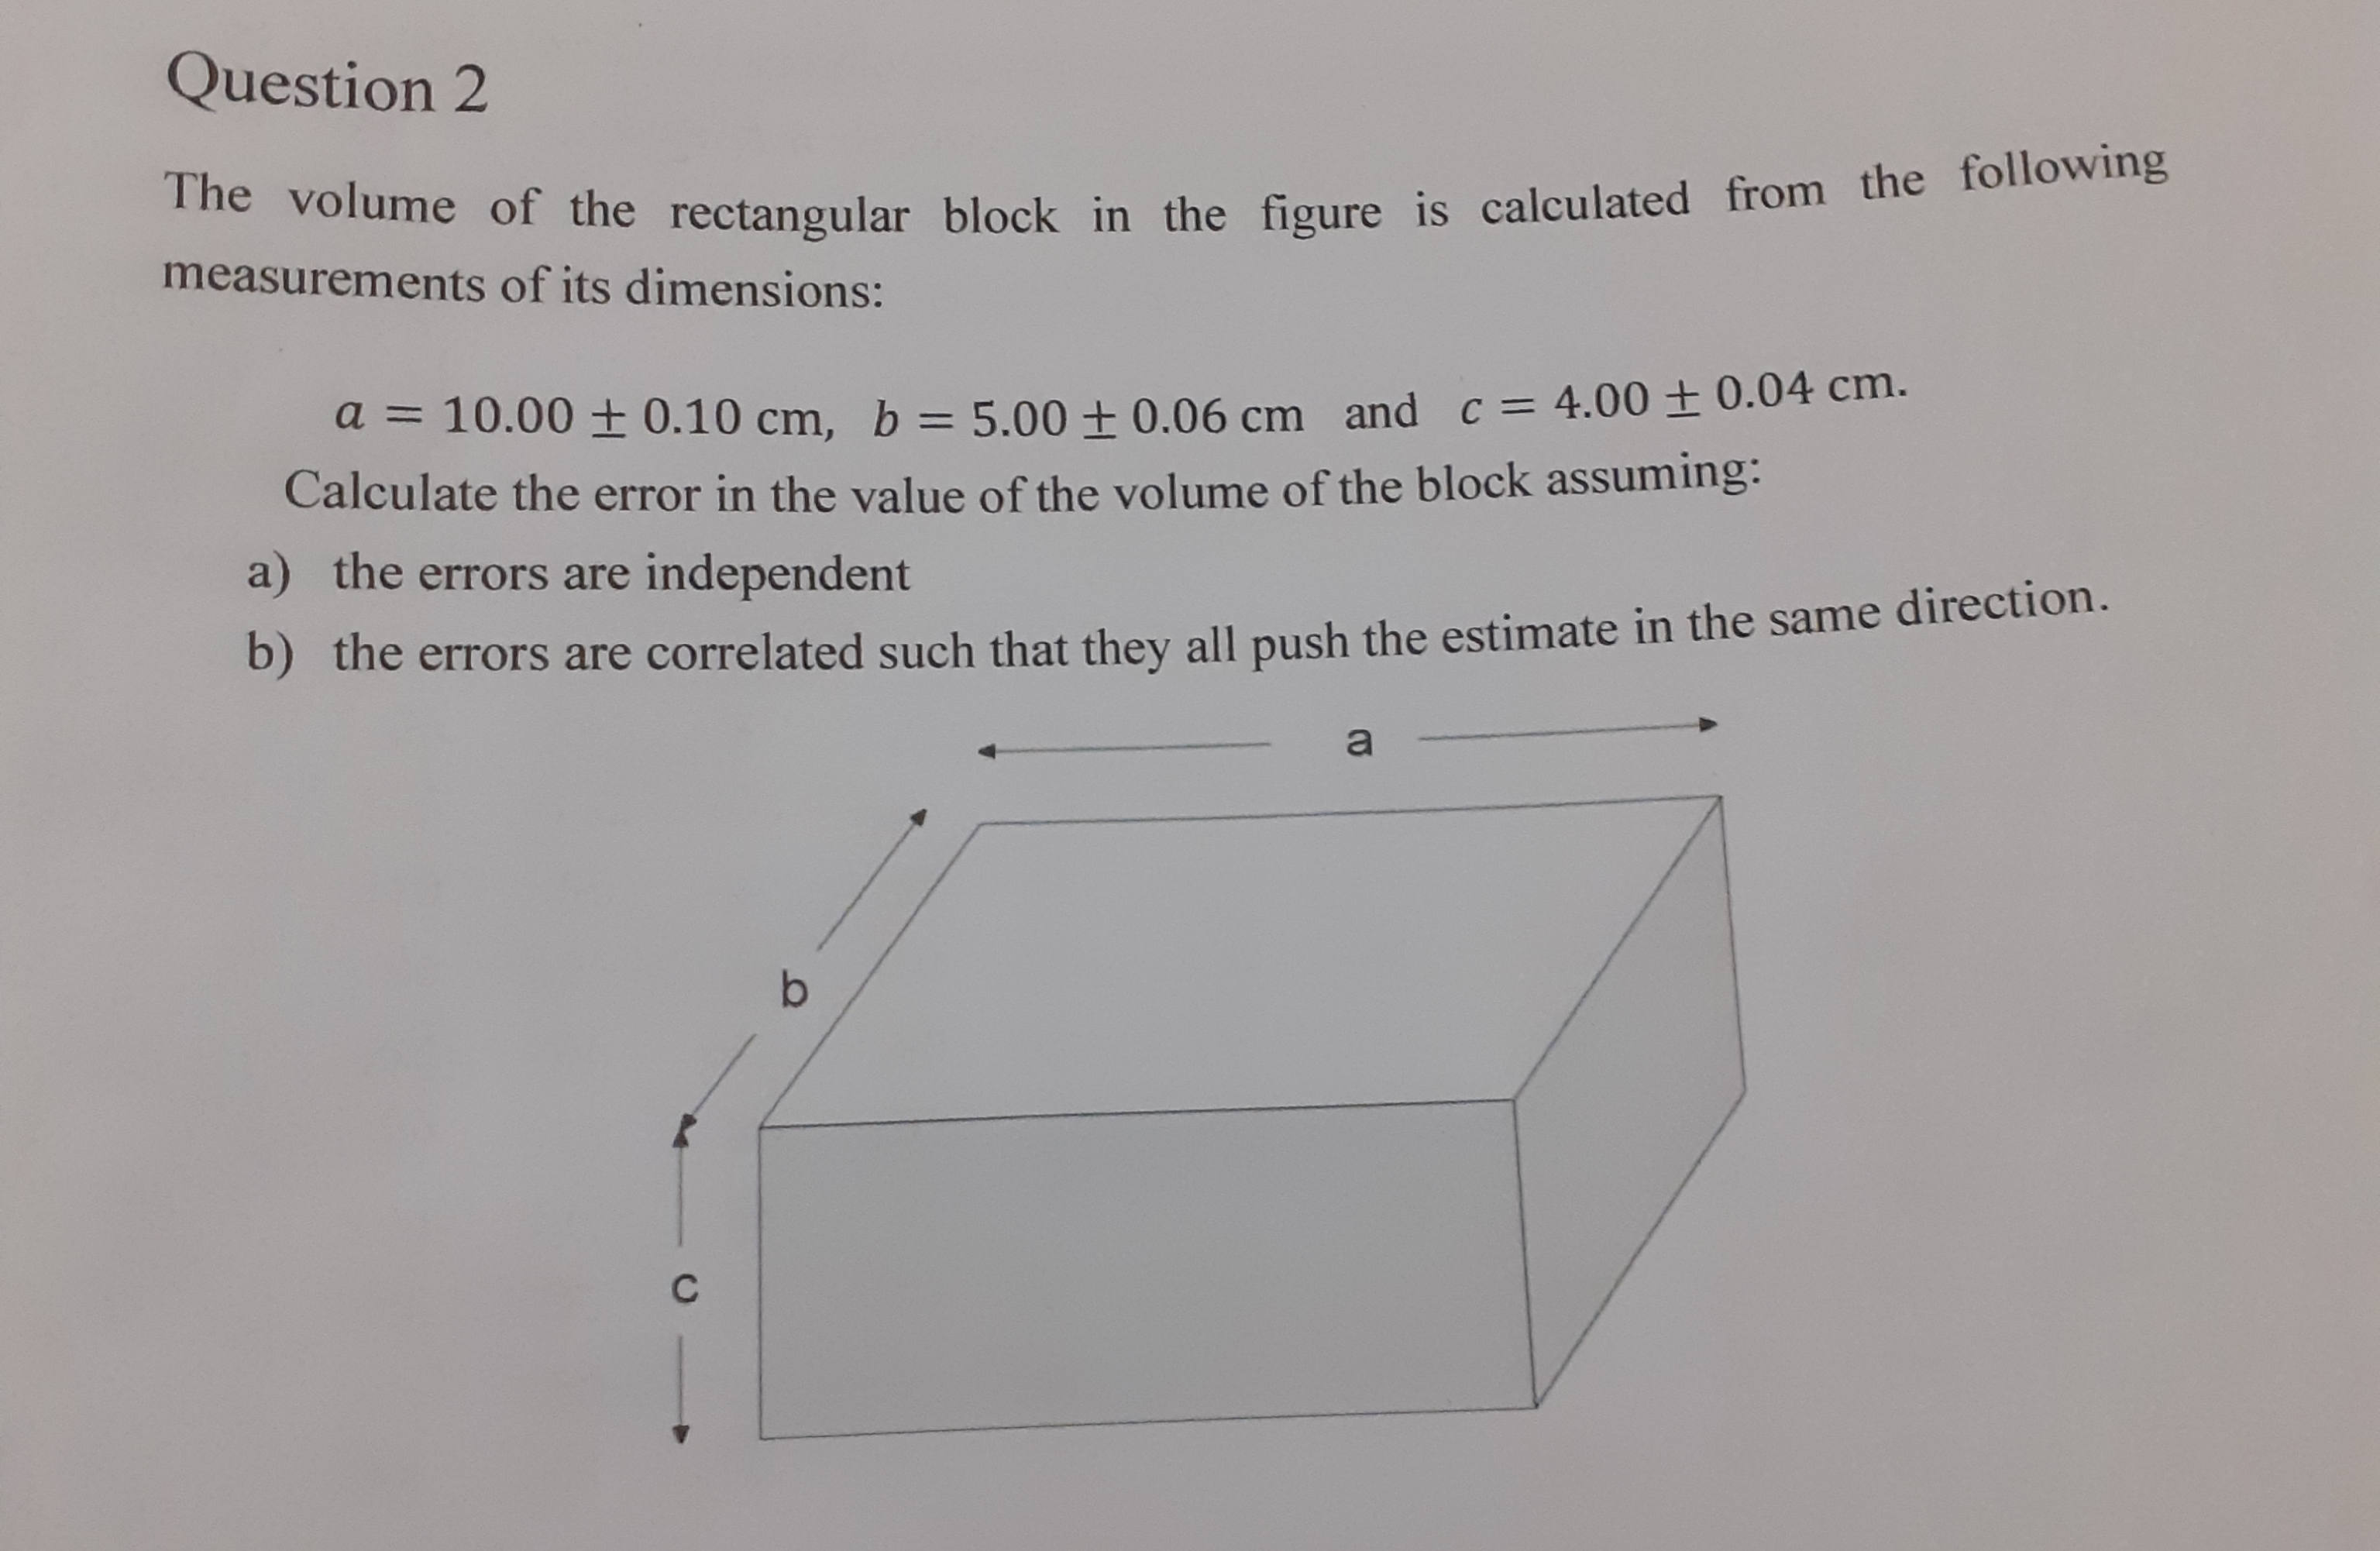 The volume of the rectangular block in the figure is calculated from the following
measurements of its dimensions:
a = 10.00 + 0.10 cm, b = 5.00 + 0.06 cm and c = 4.00 ± 0.04 cm.
%3D
Calculate the error in the value of the volume of the block assuming:
a) the errors are independent
b) the errors are correlated such that they all push the estimate in the same direction.
